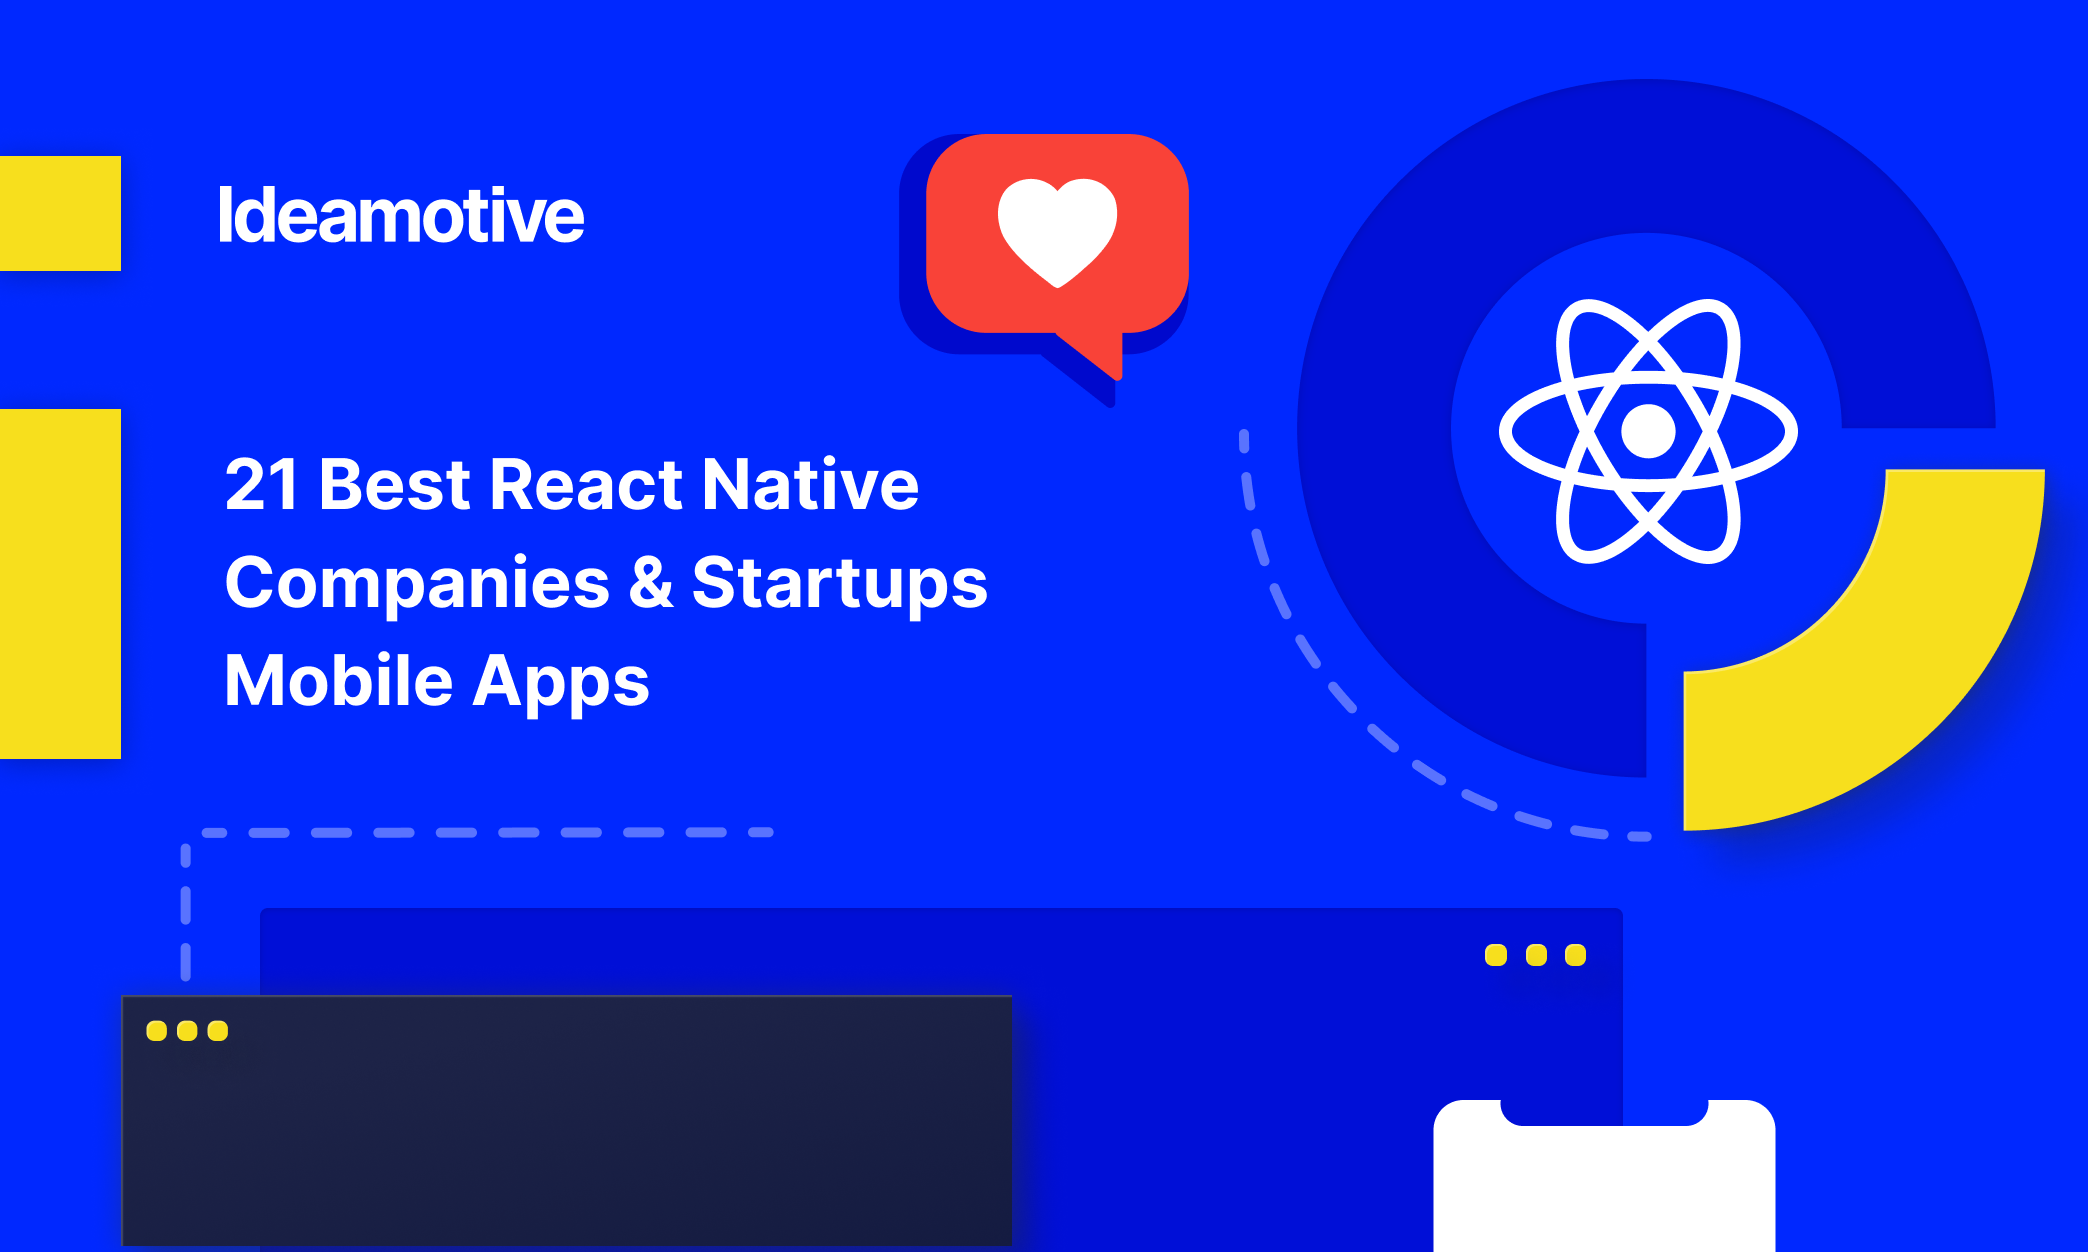 A Tale of Reducing Expo/React Native Android Application - DEV